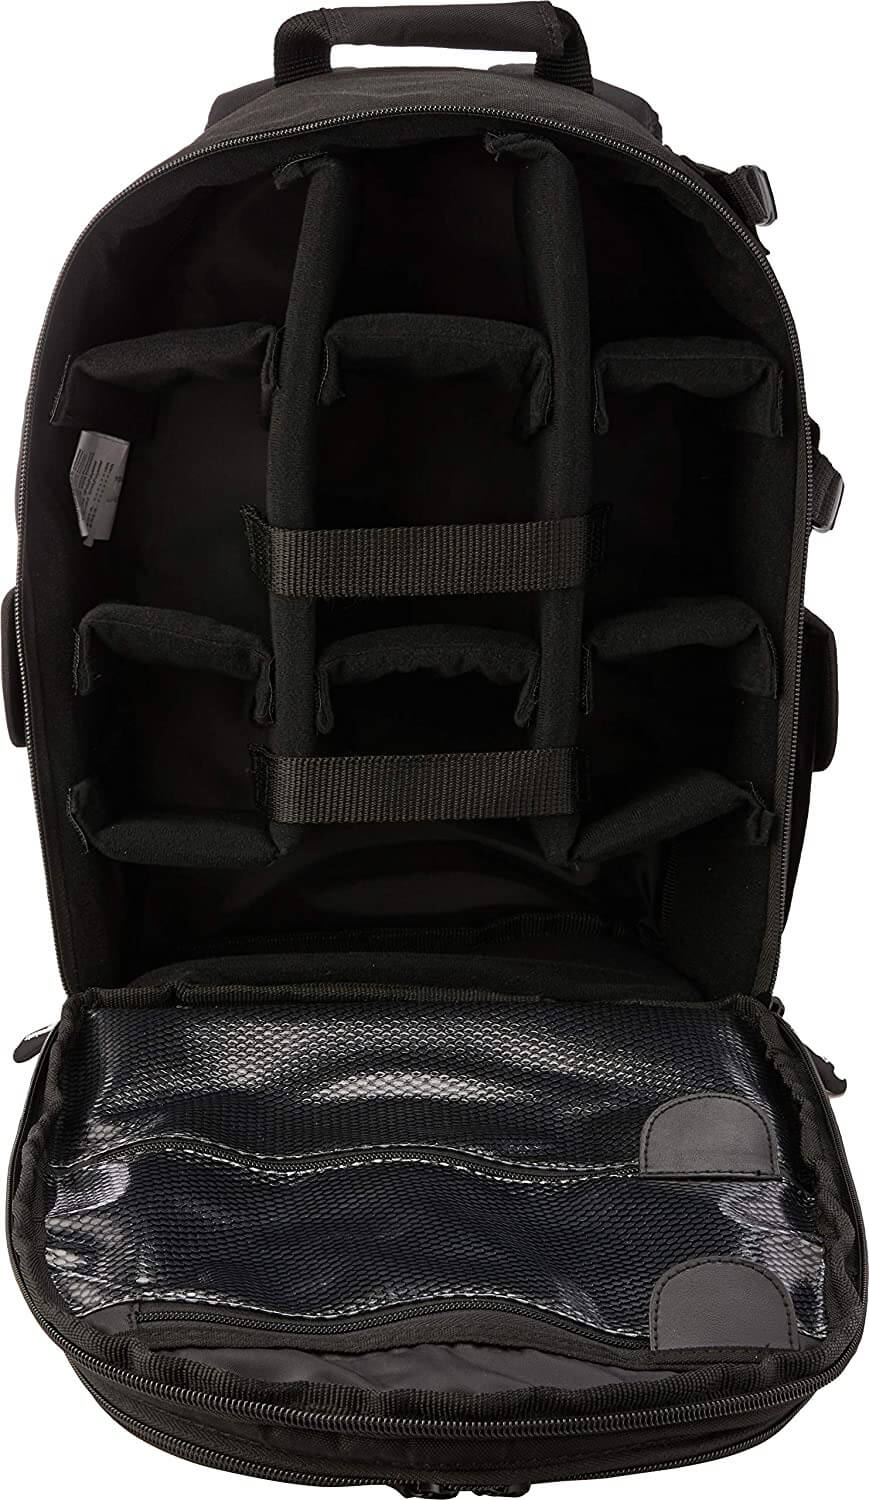 Top Ten DSLR Camera Bags - AmazonBasics Backpack for SLR Cameras and Accessories